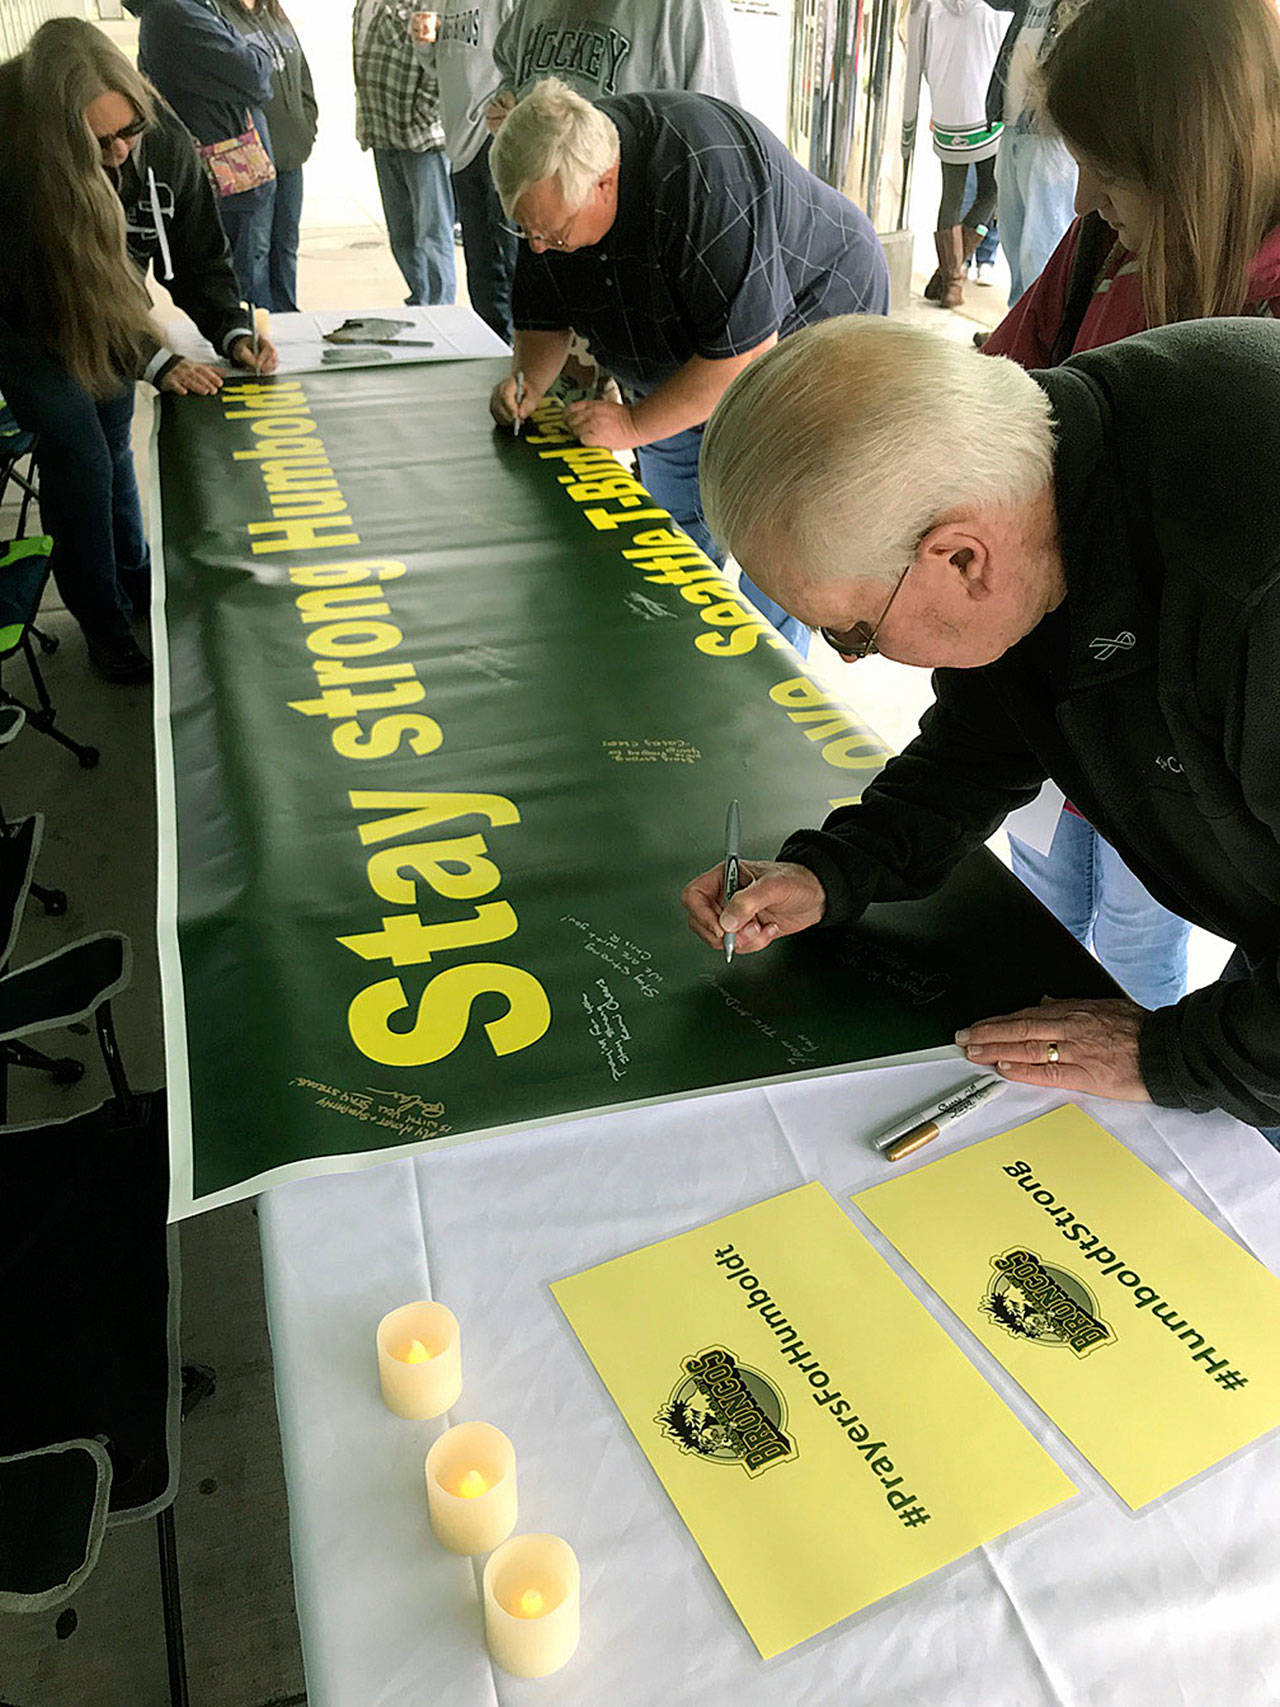 Bruce McDonald, foreground, and his 15-year-old granddaughter, Chloe, join others outside the accesso ShoWare Center last Saturday in signing a banner supporting the Humboldt, Saskatchewan junior hockey team. MARK KLAAS, Kent Reporter